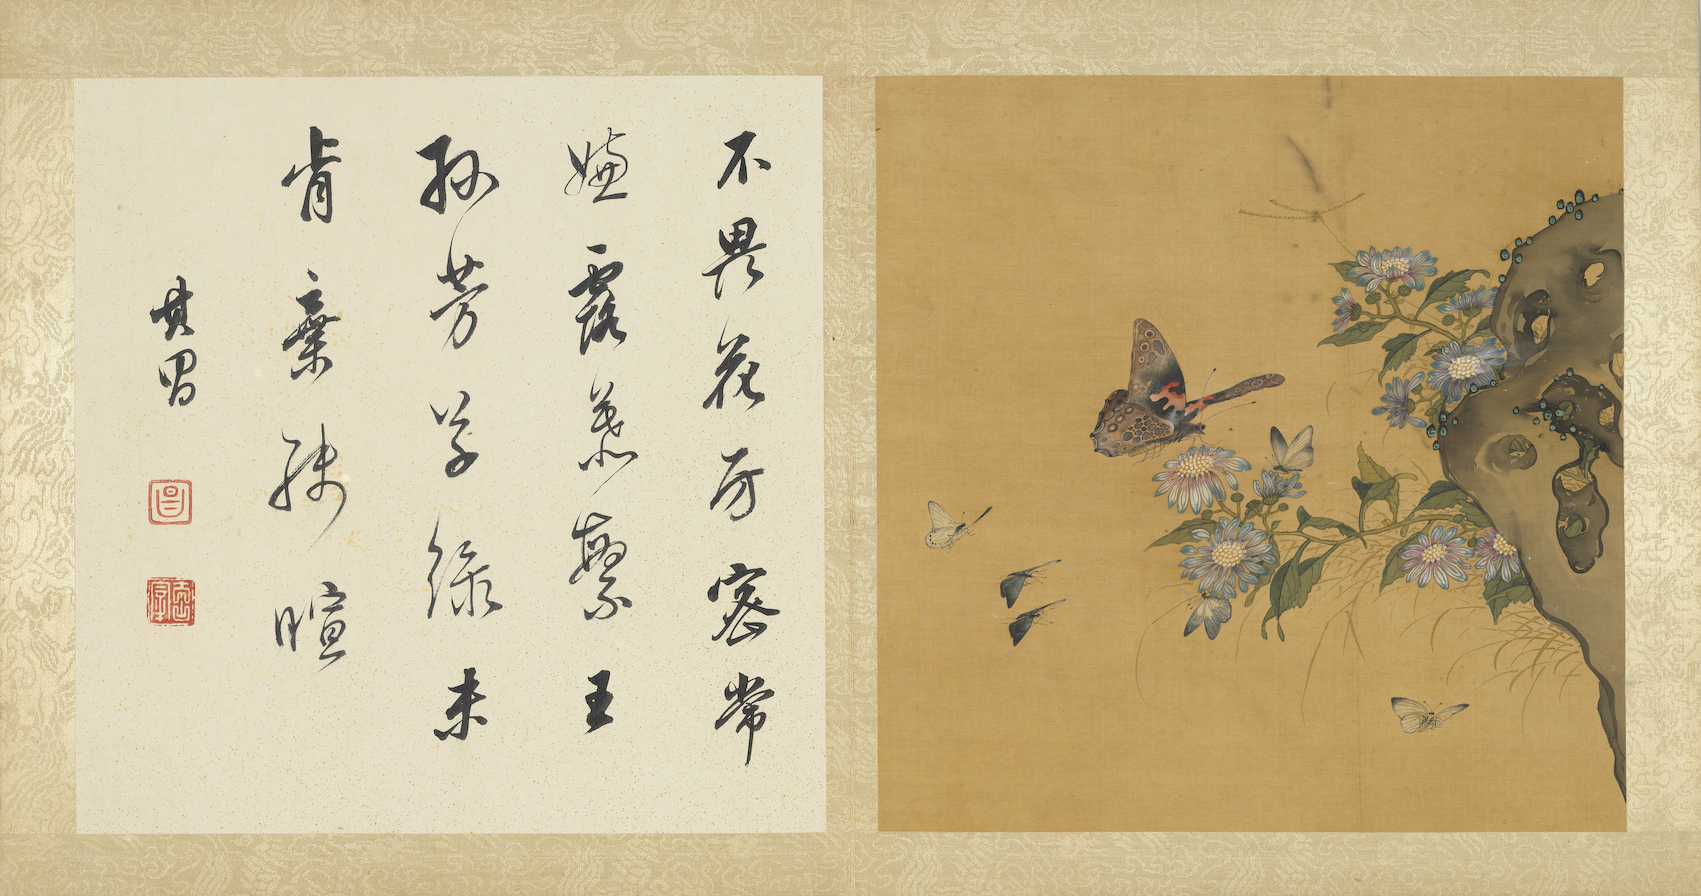 Biography of Song Qian Xuan, One of the Atlas of Ancient Flowers and Butterflies